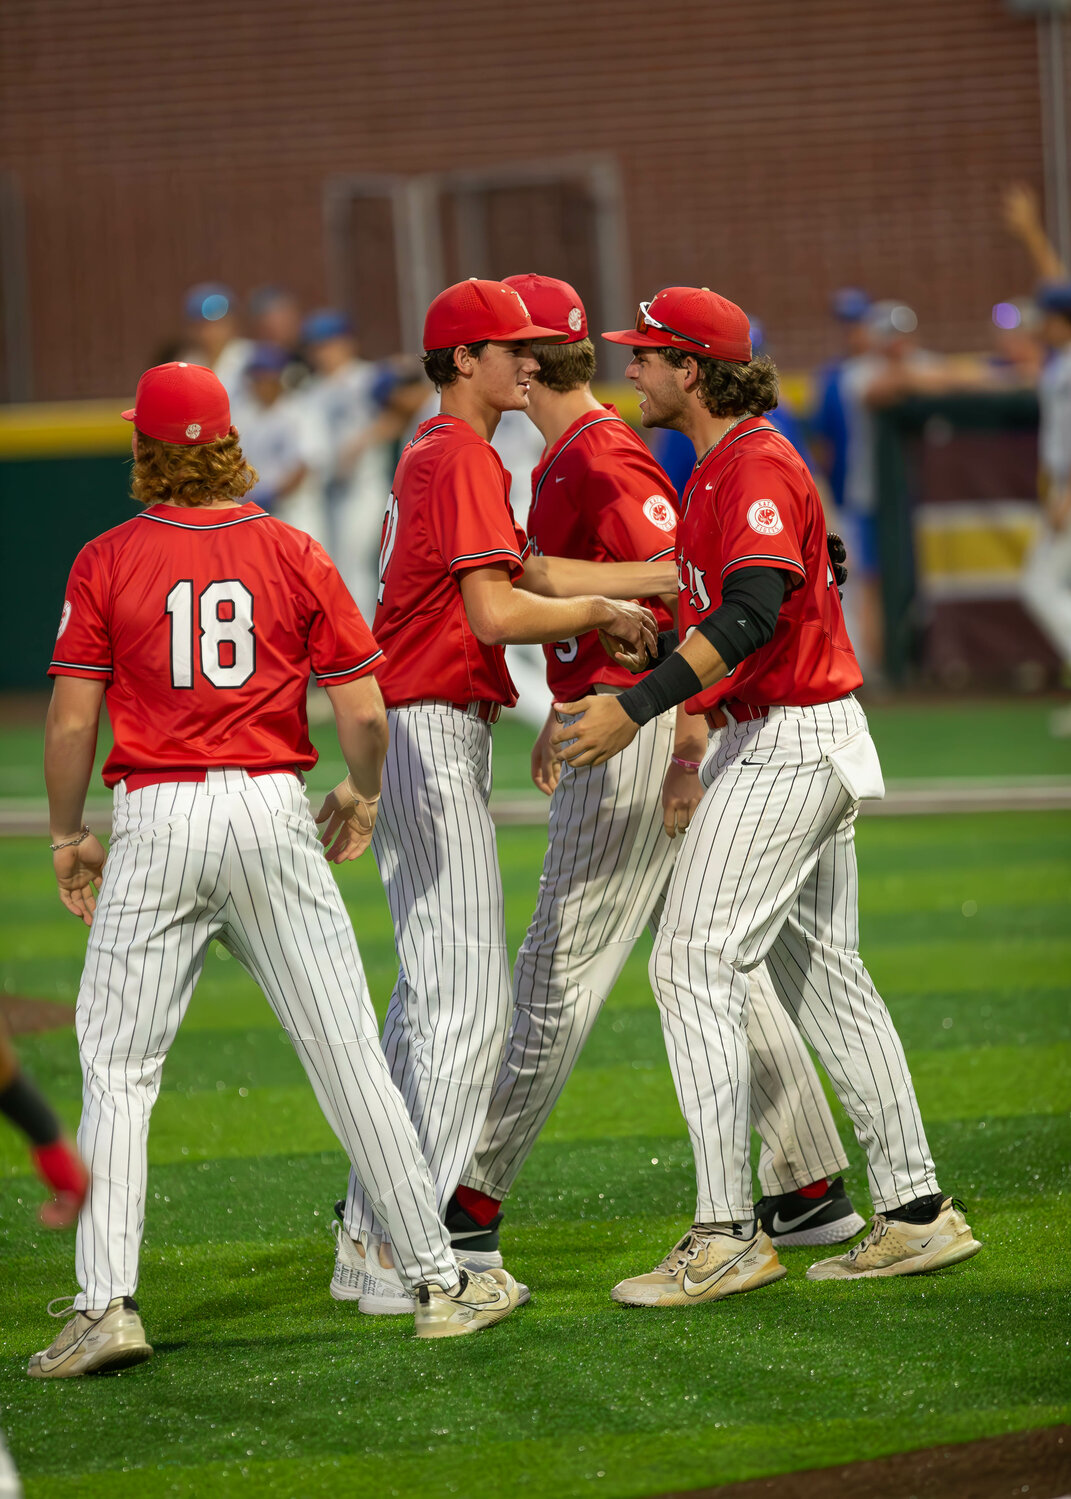 Cole Kaase celebrates with Cade Nelson after an inning during Wednesday's Regional Semifinal between Katy and Clear Springs at Deer Park.